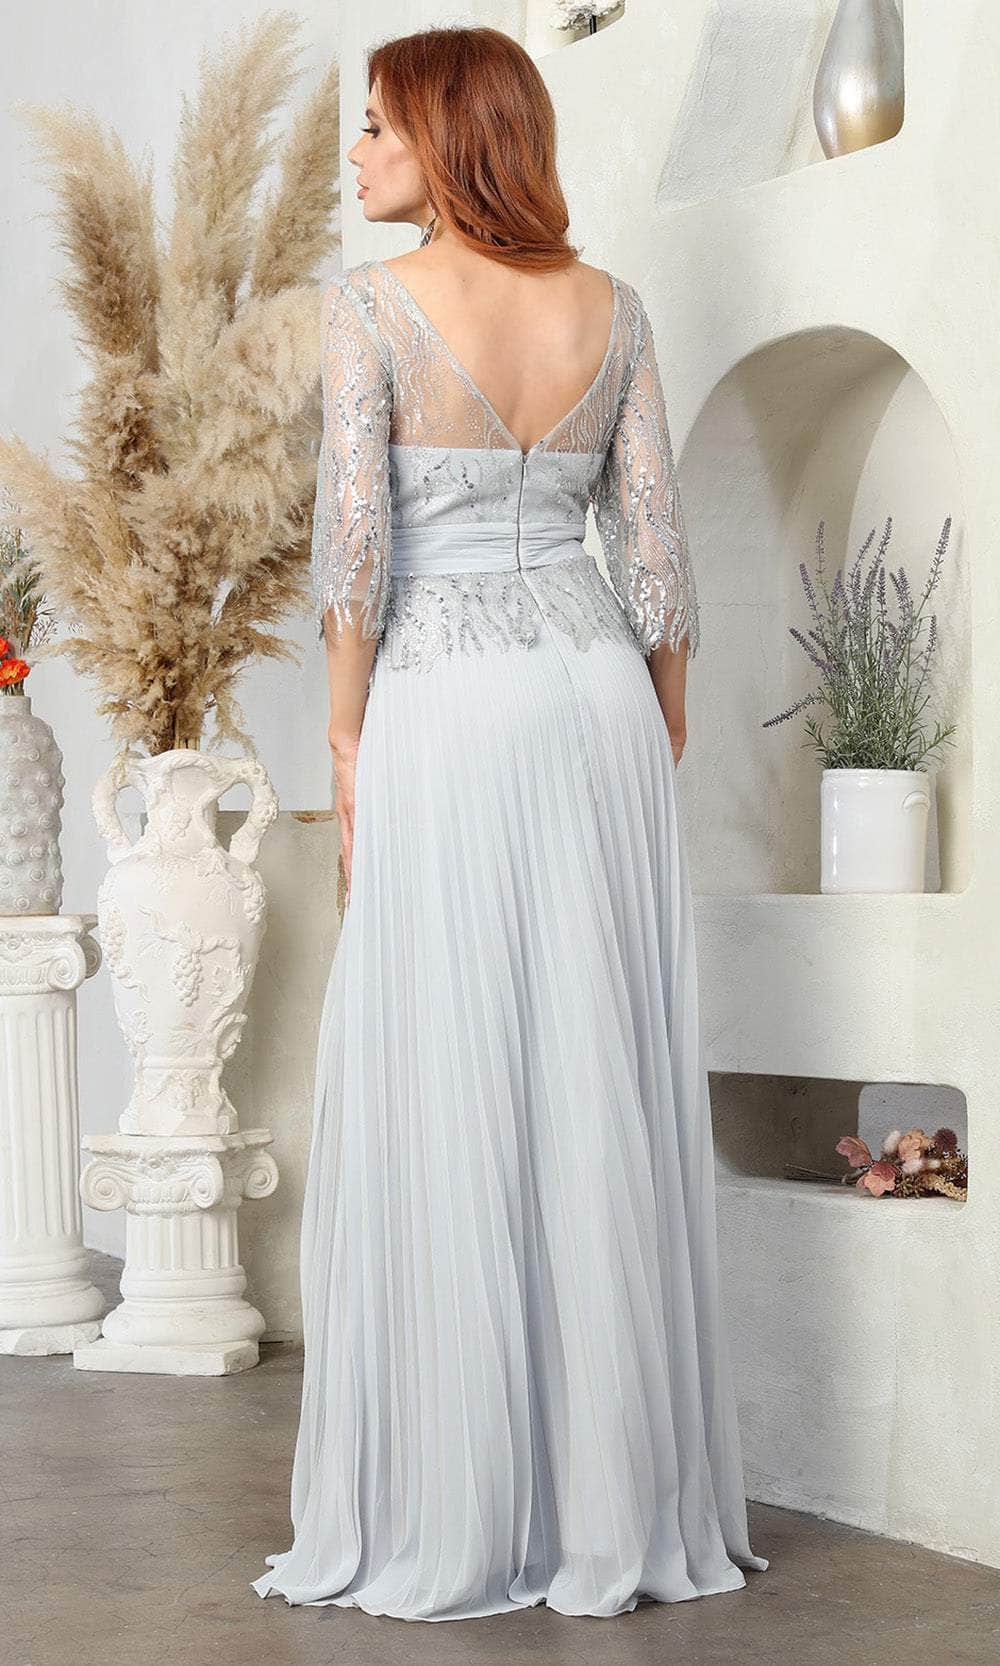 May Queen MQ2007 - Long Sleeve Embellished Evening Dress Mother of the Bride Dresses